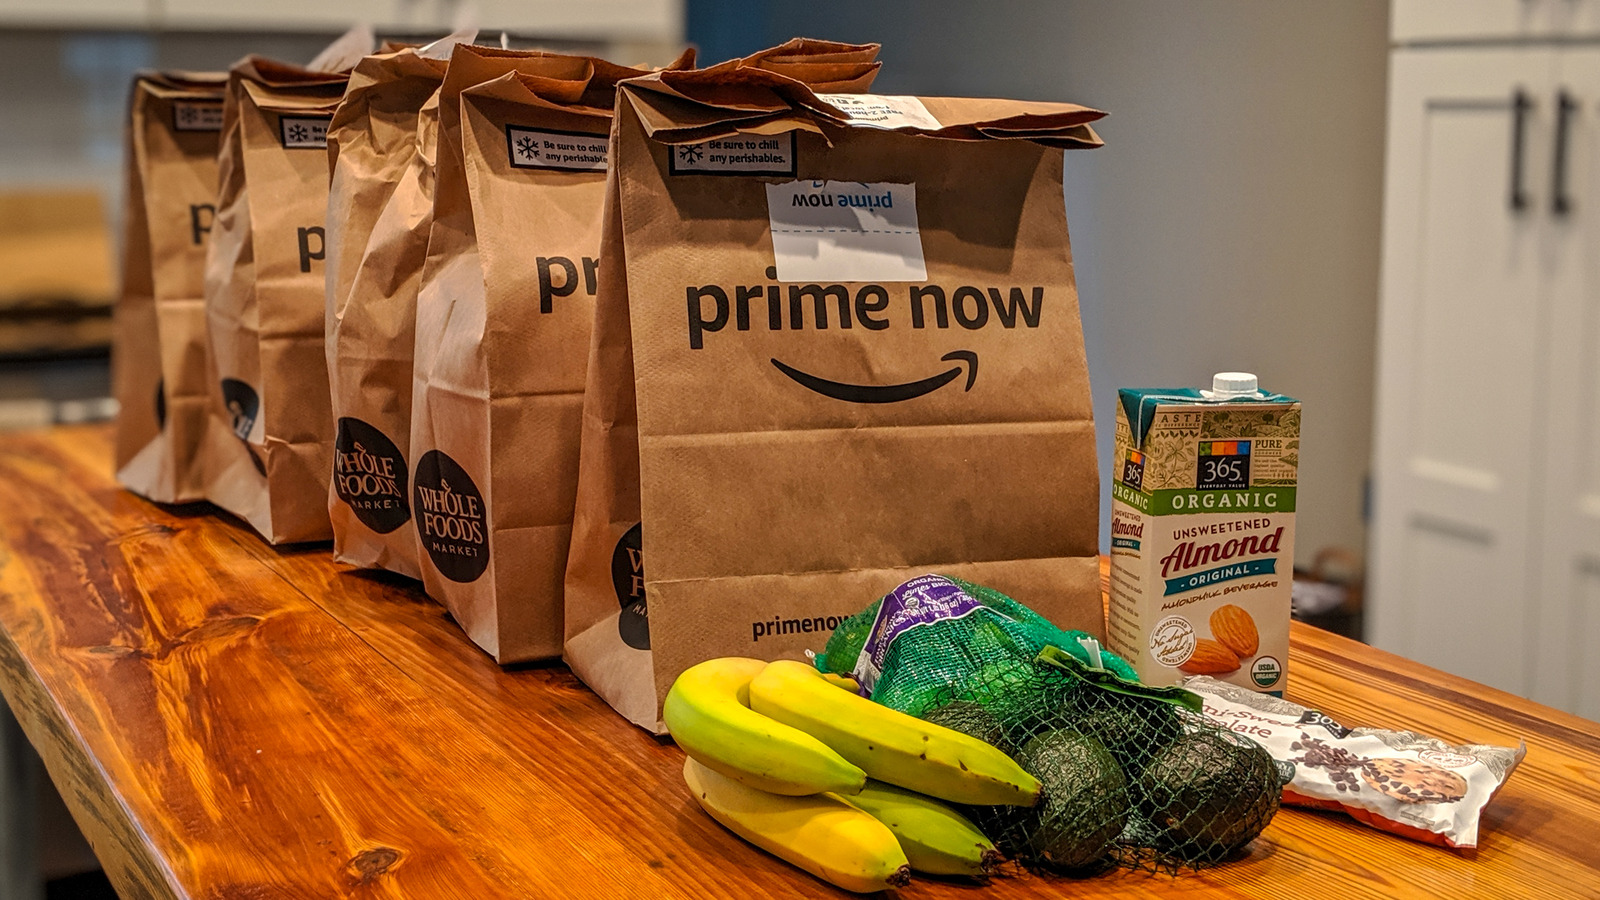 https://www.mashed.com/img/gallery/why-amazon-prime-members-are-suing-over-whole-foods-delivery/l-intro-1655310633.jpg